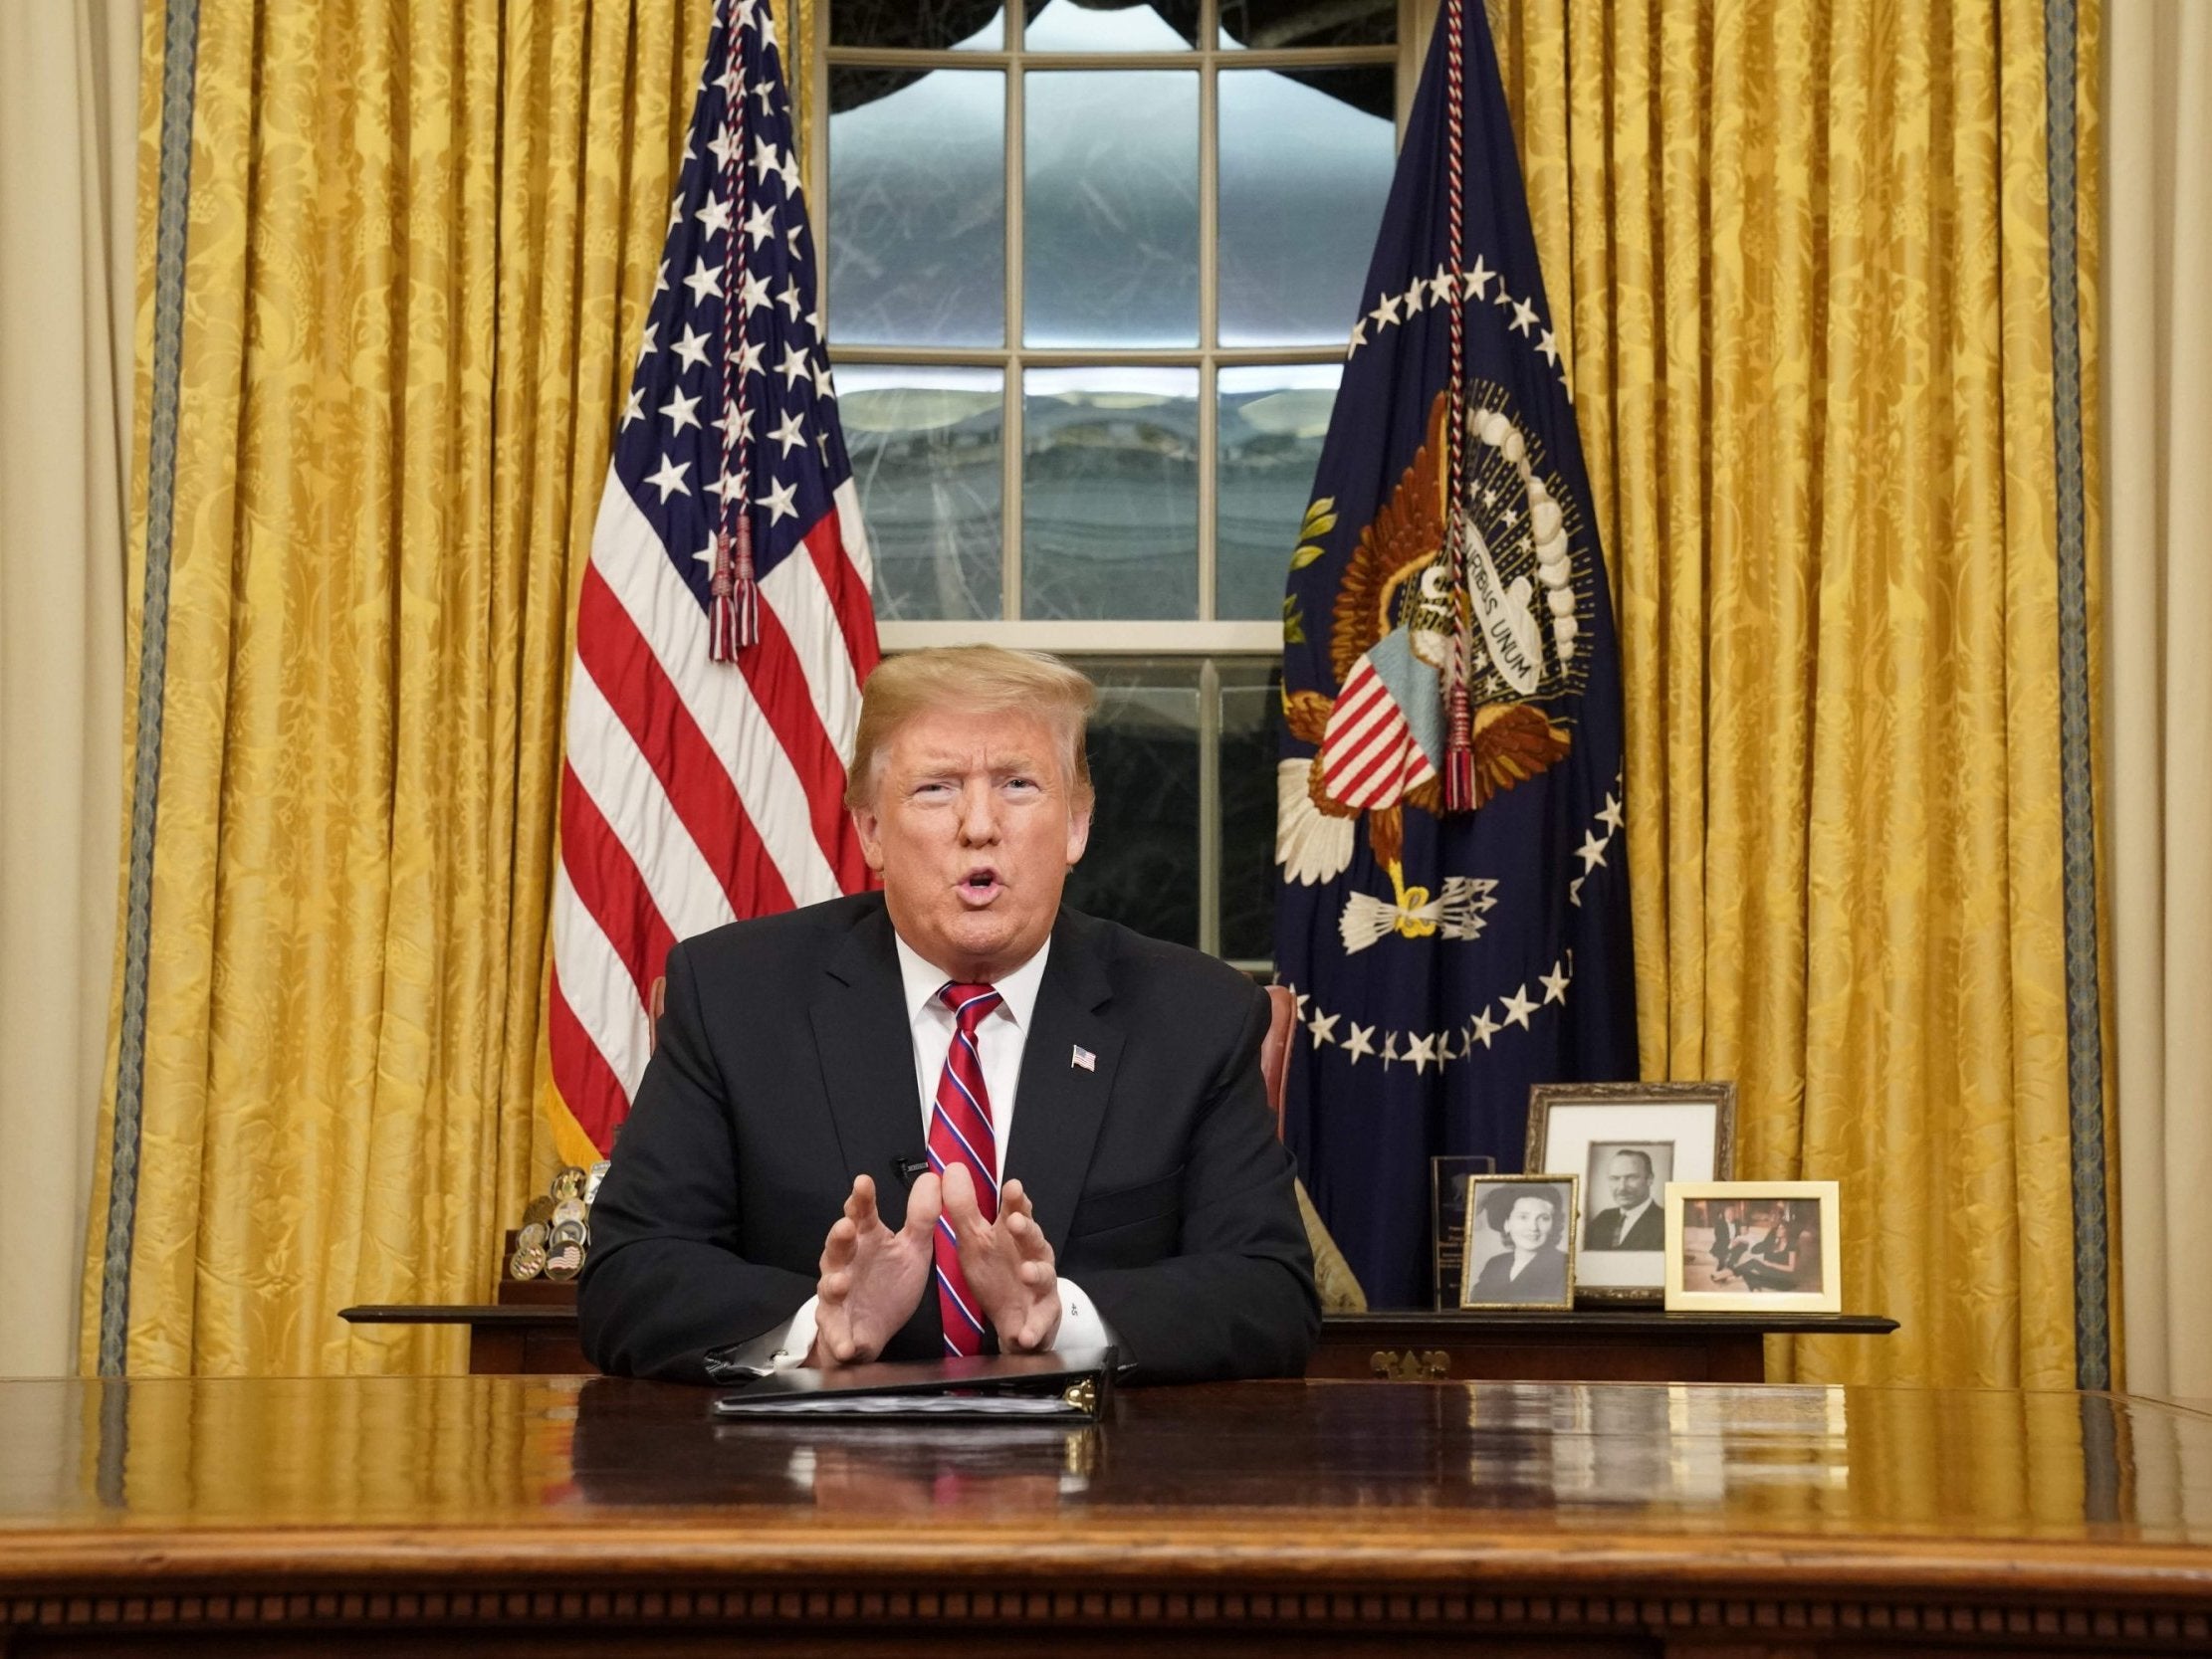 US President Donald Trump delivers a televised address to the nation on funding for a border wall